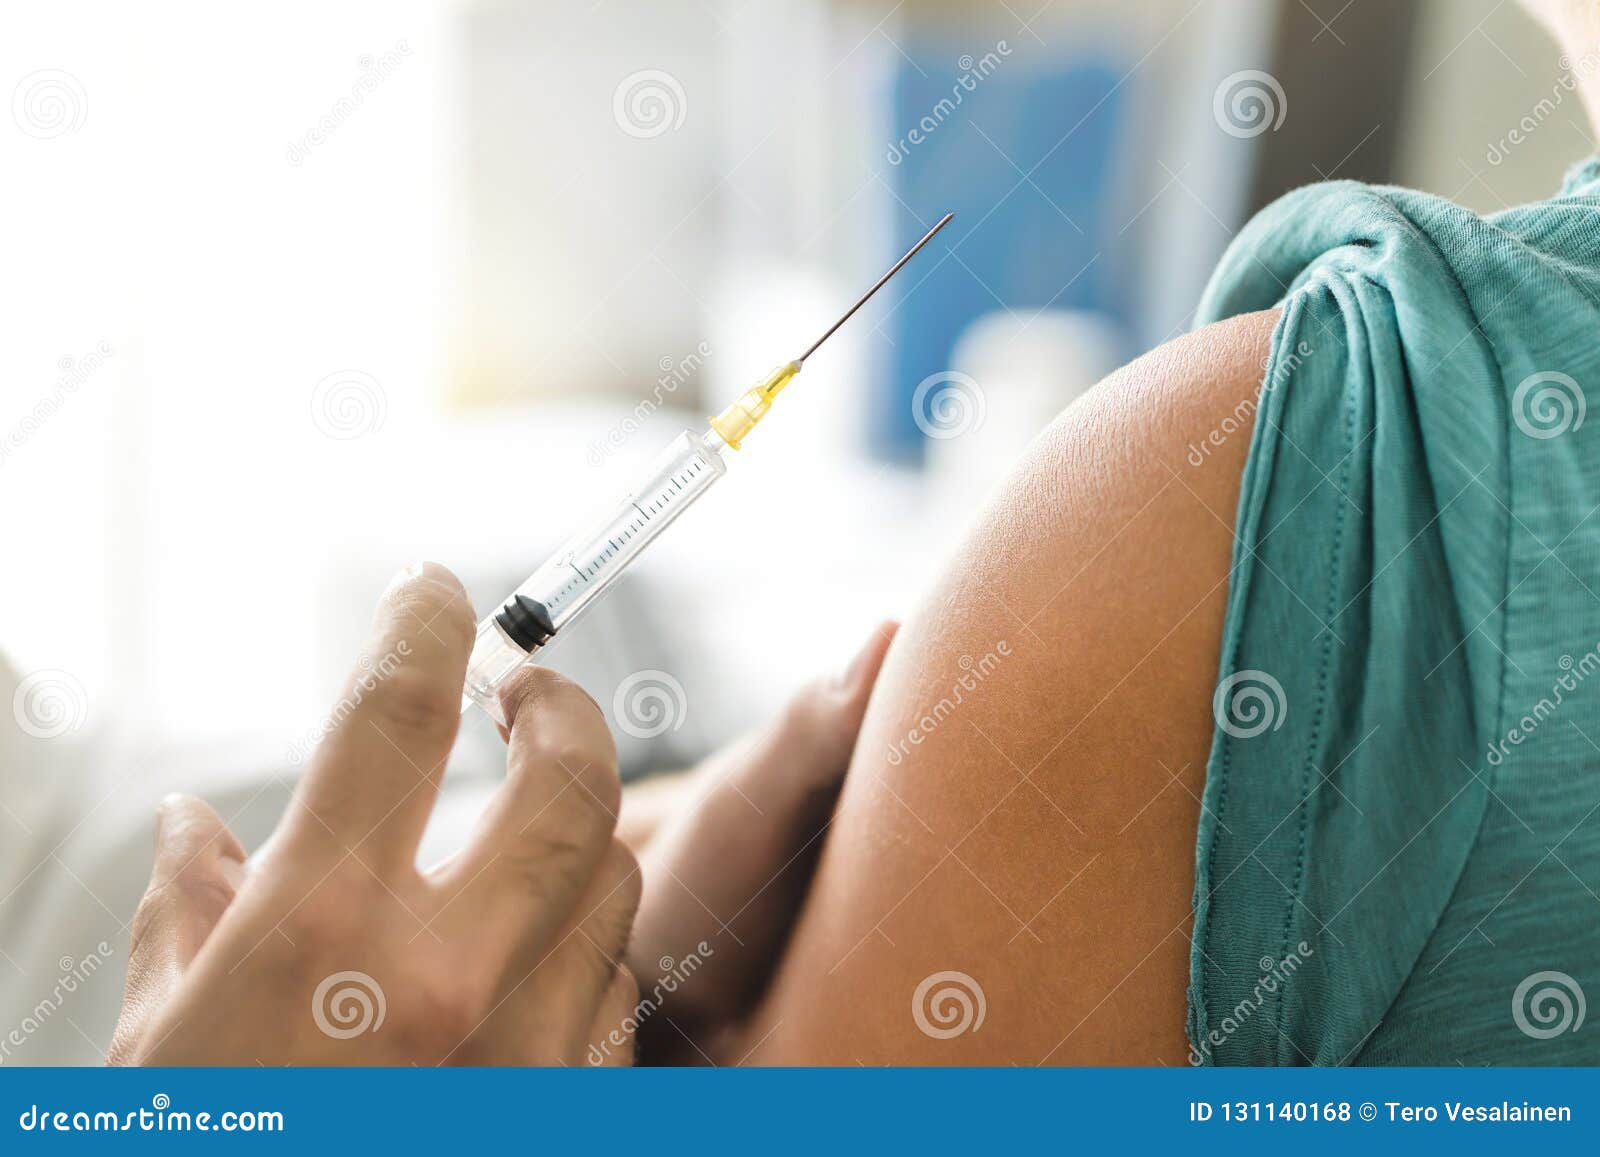 vaccine or flu shot in injection needle. doctor working with patient`s arma.